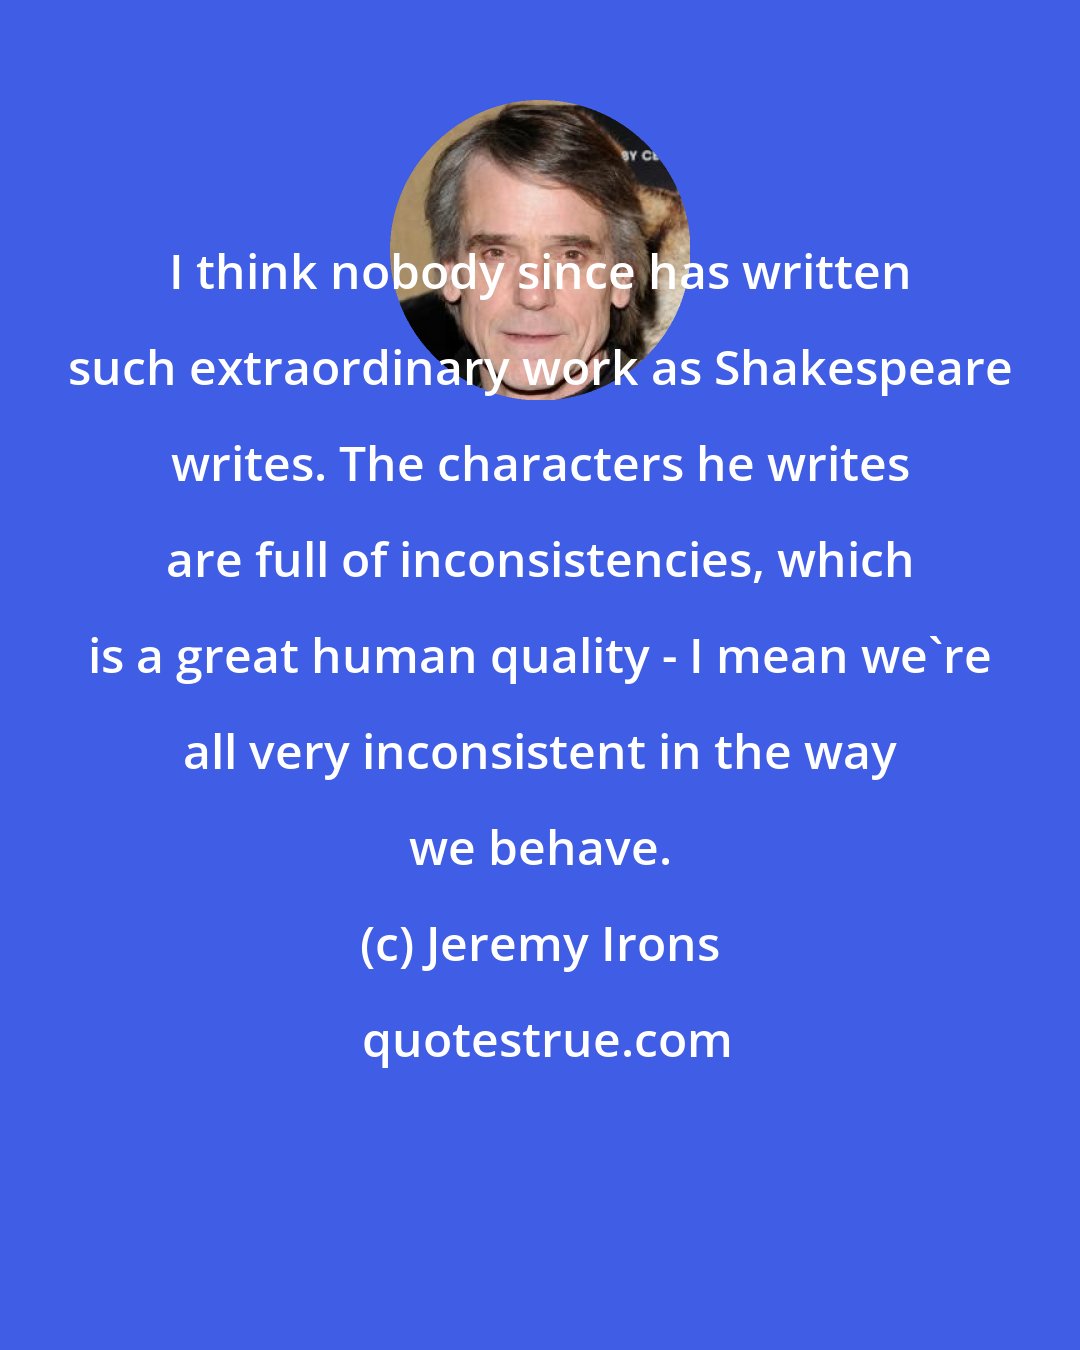 Jeremy Irons: I think nobody since has written such extraordinary work as Shakespeare writes. The characters he writes are full of inconsistencies, which is a great human quality - I mean we're all very inconsistent in the way we behave.